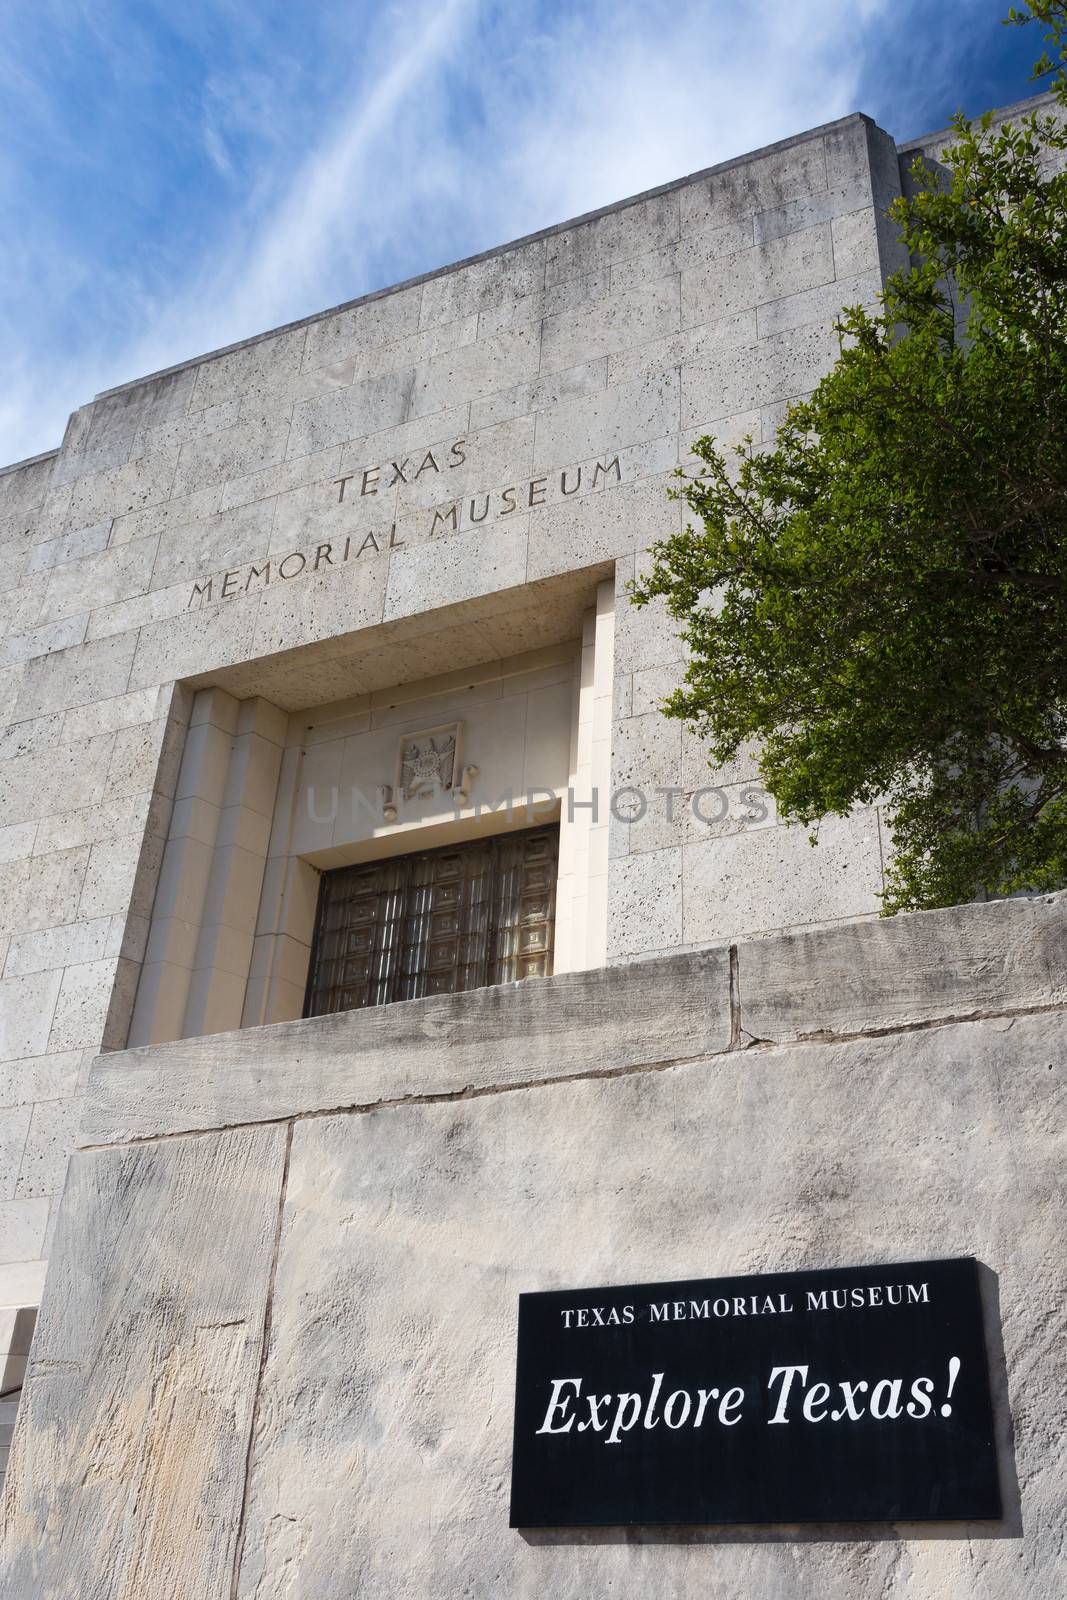 Texas Memorial Museum by wolterk